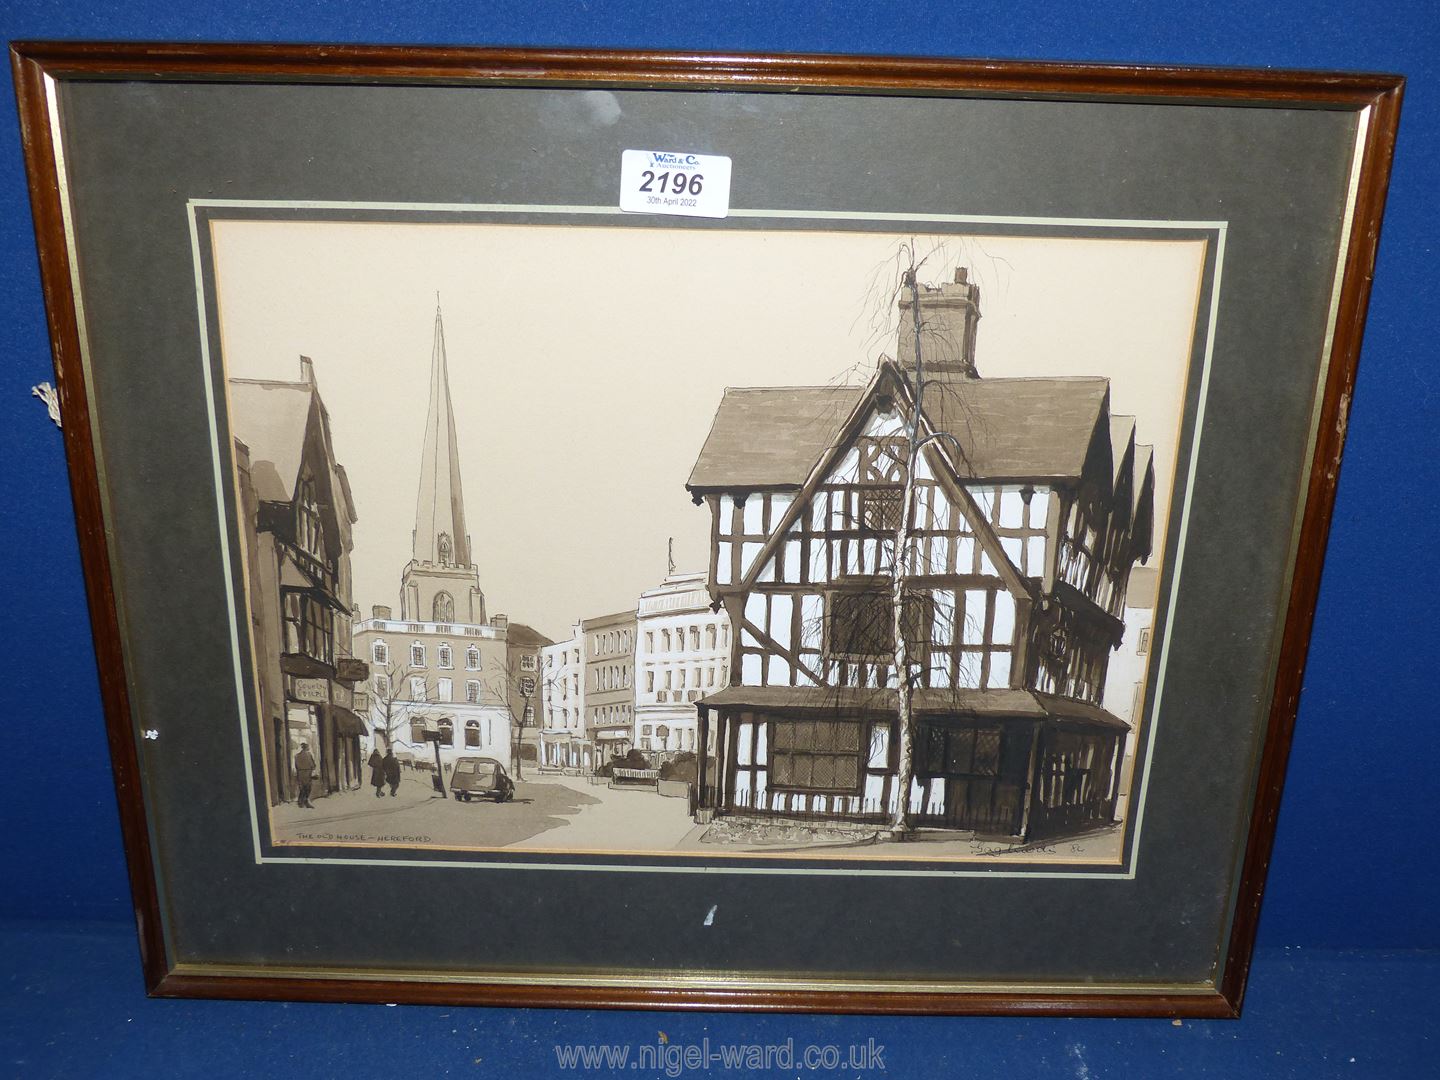 A framed and mounted inkwash Bunty Gagliardi painting of The Old House, Hereford,